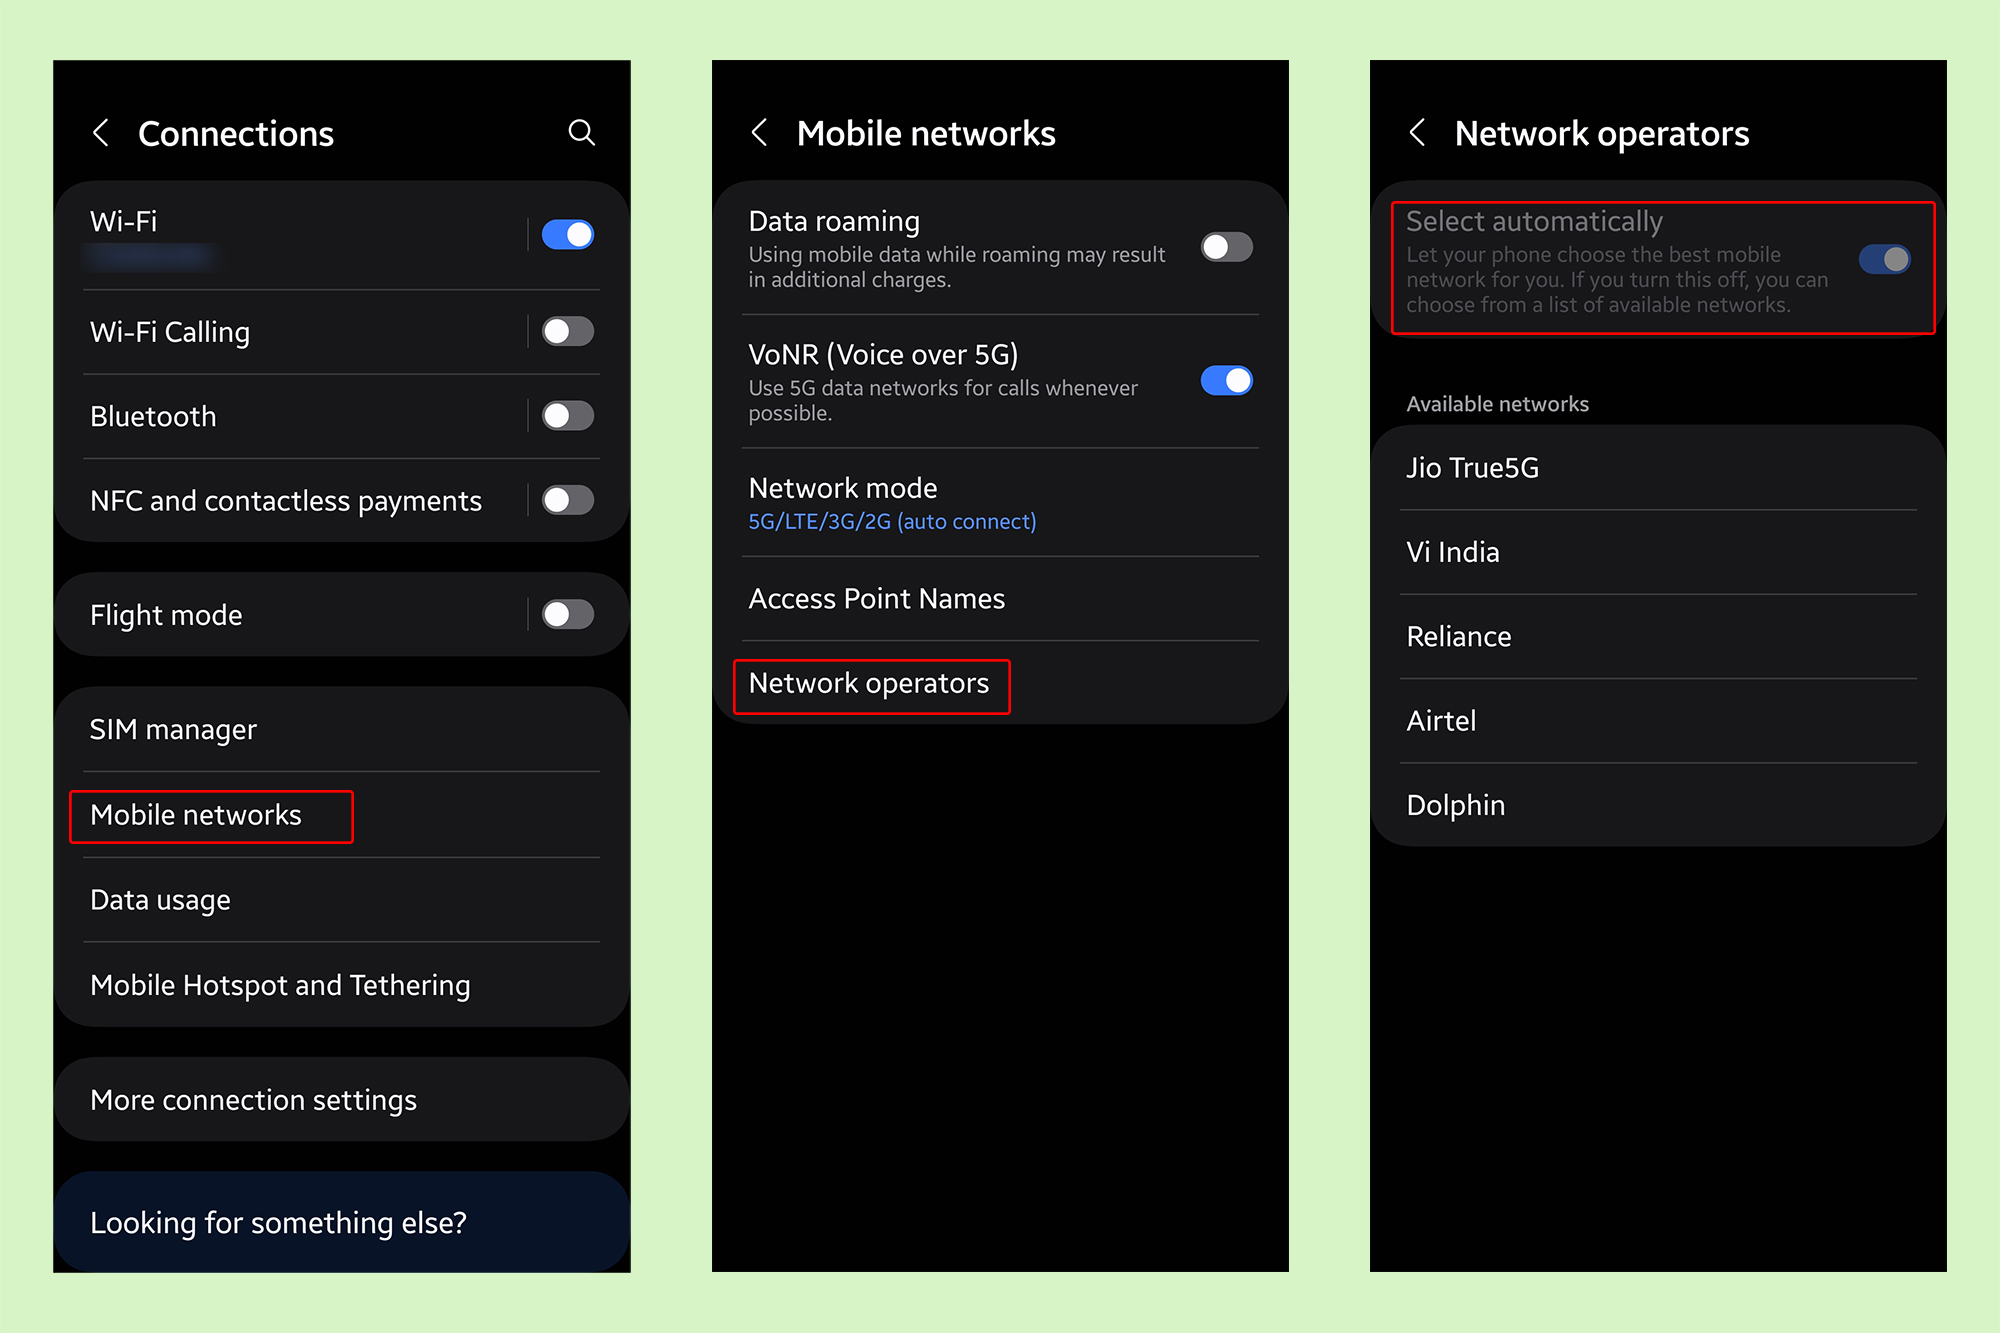 How to fix the ‘Not Registered on Network’ error on a Samsung Galaxy phone